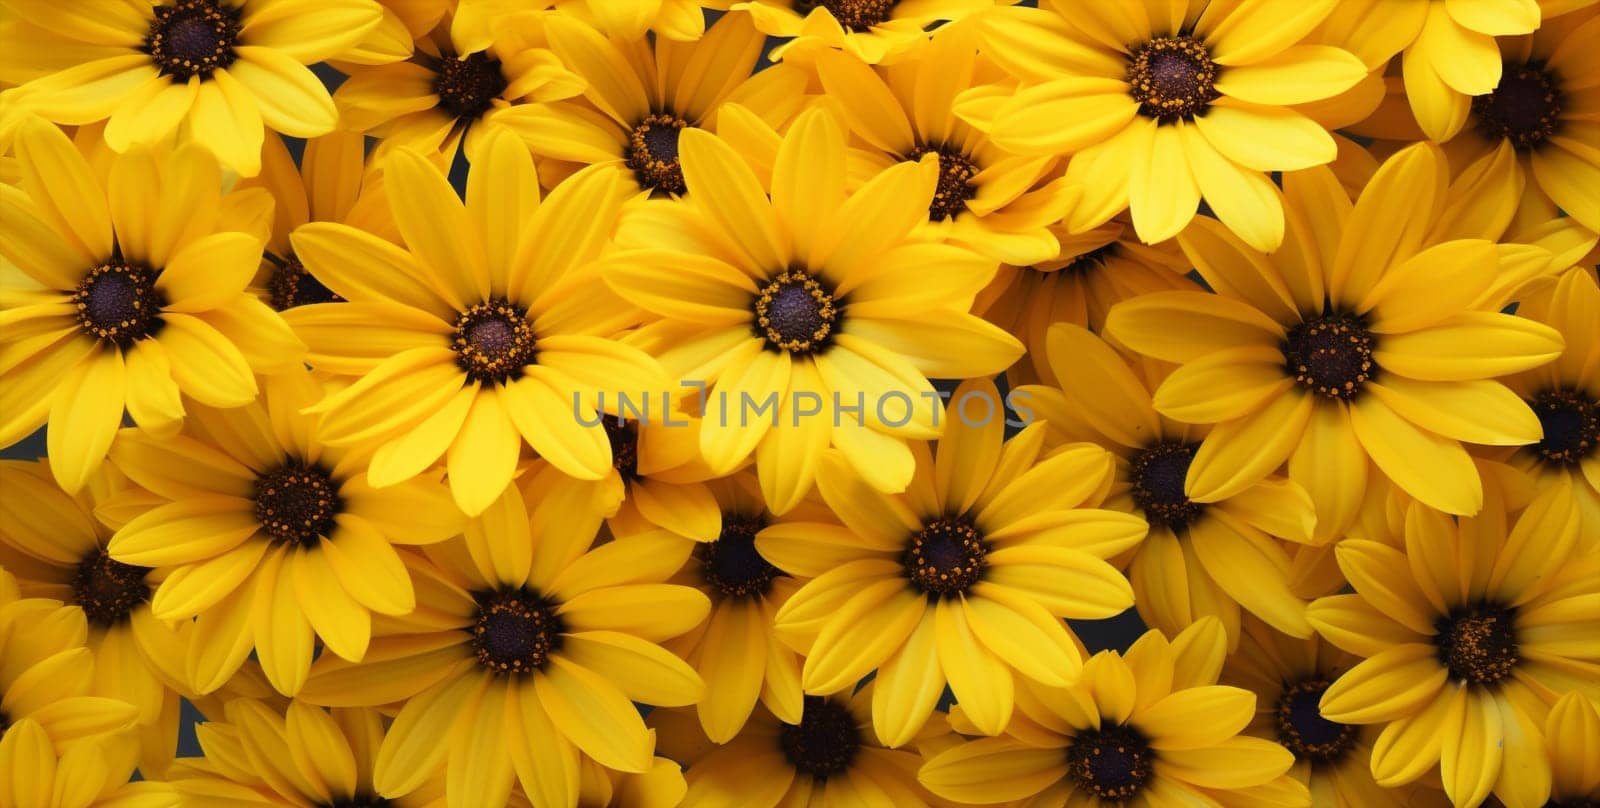 Bright bloom blossom beauty botany flower nature summer group background floral up plants chrysanthemum bouquet close yellow mockup gardening